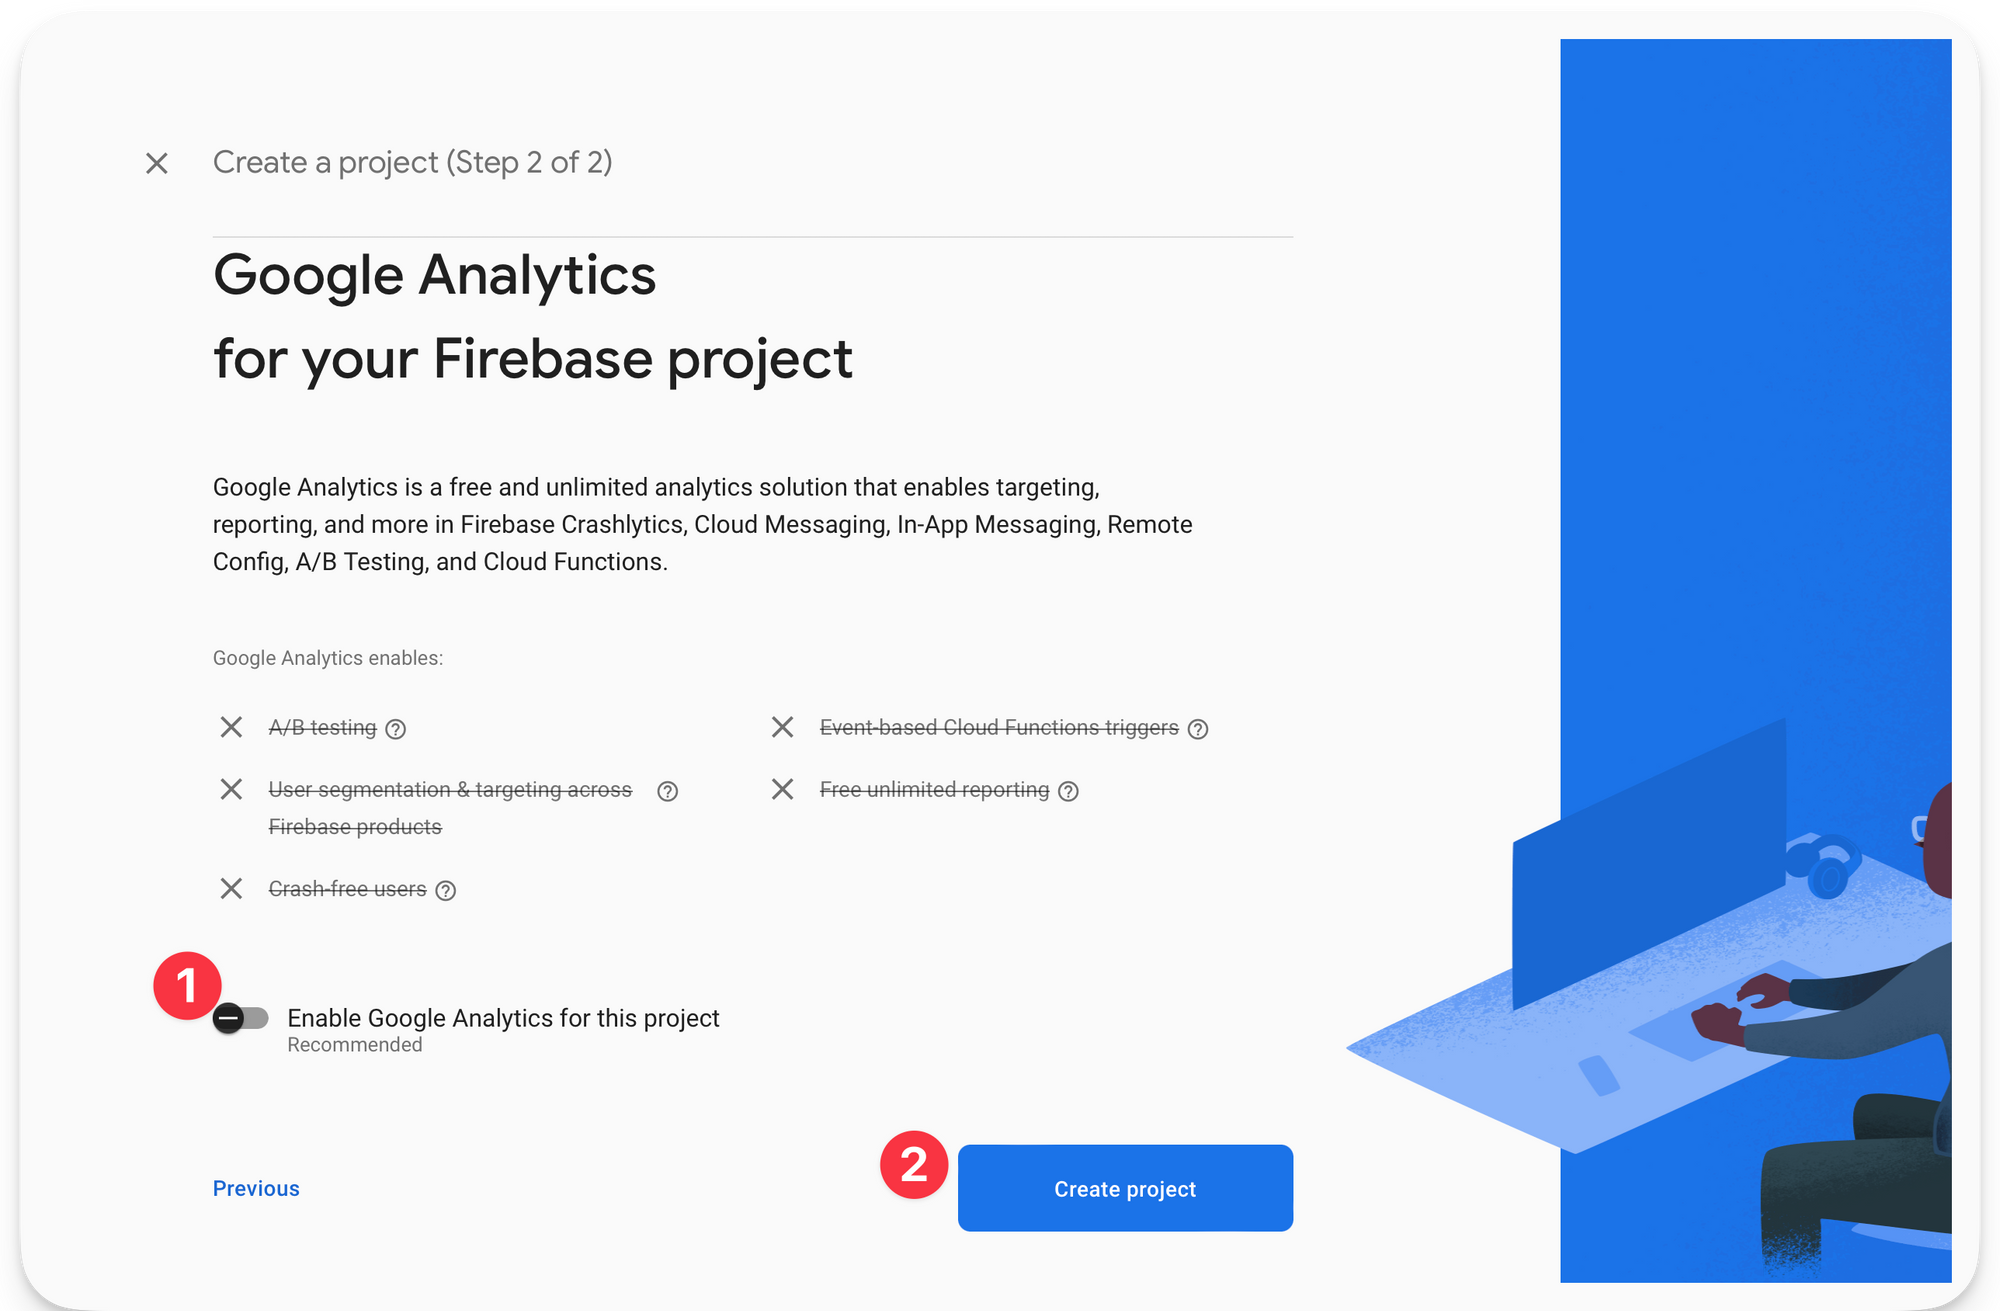 Choosing Google analytics and creating the project.